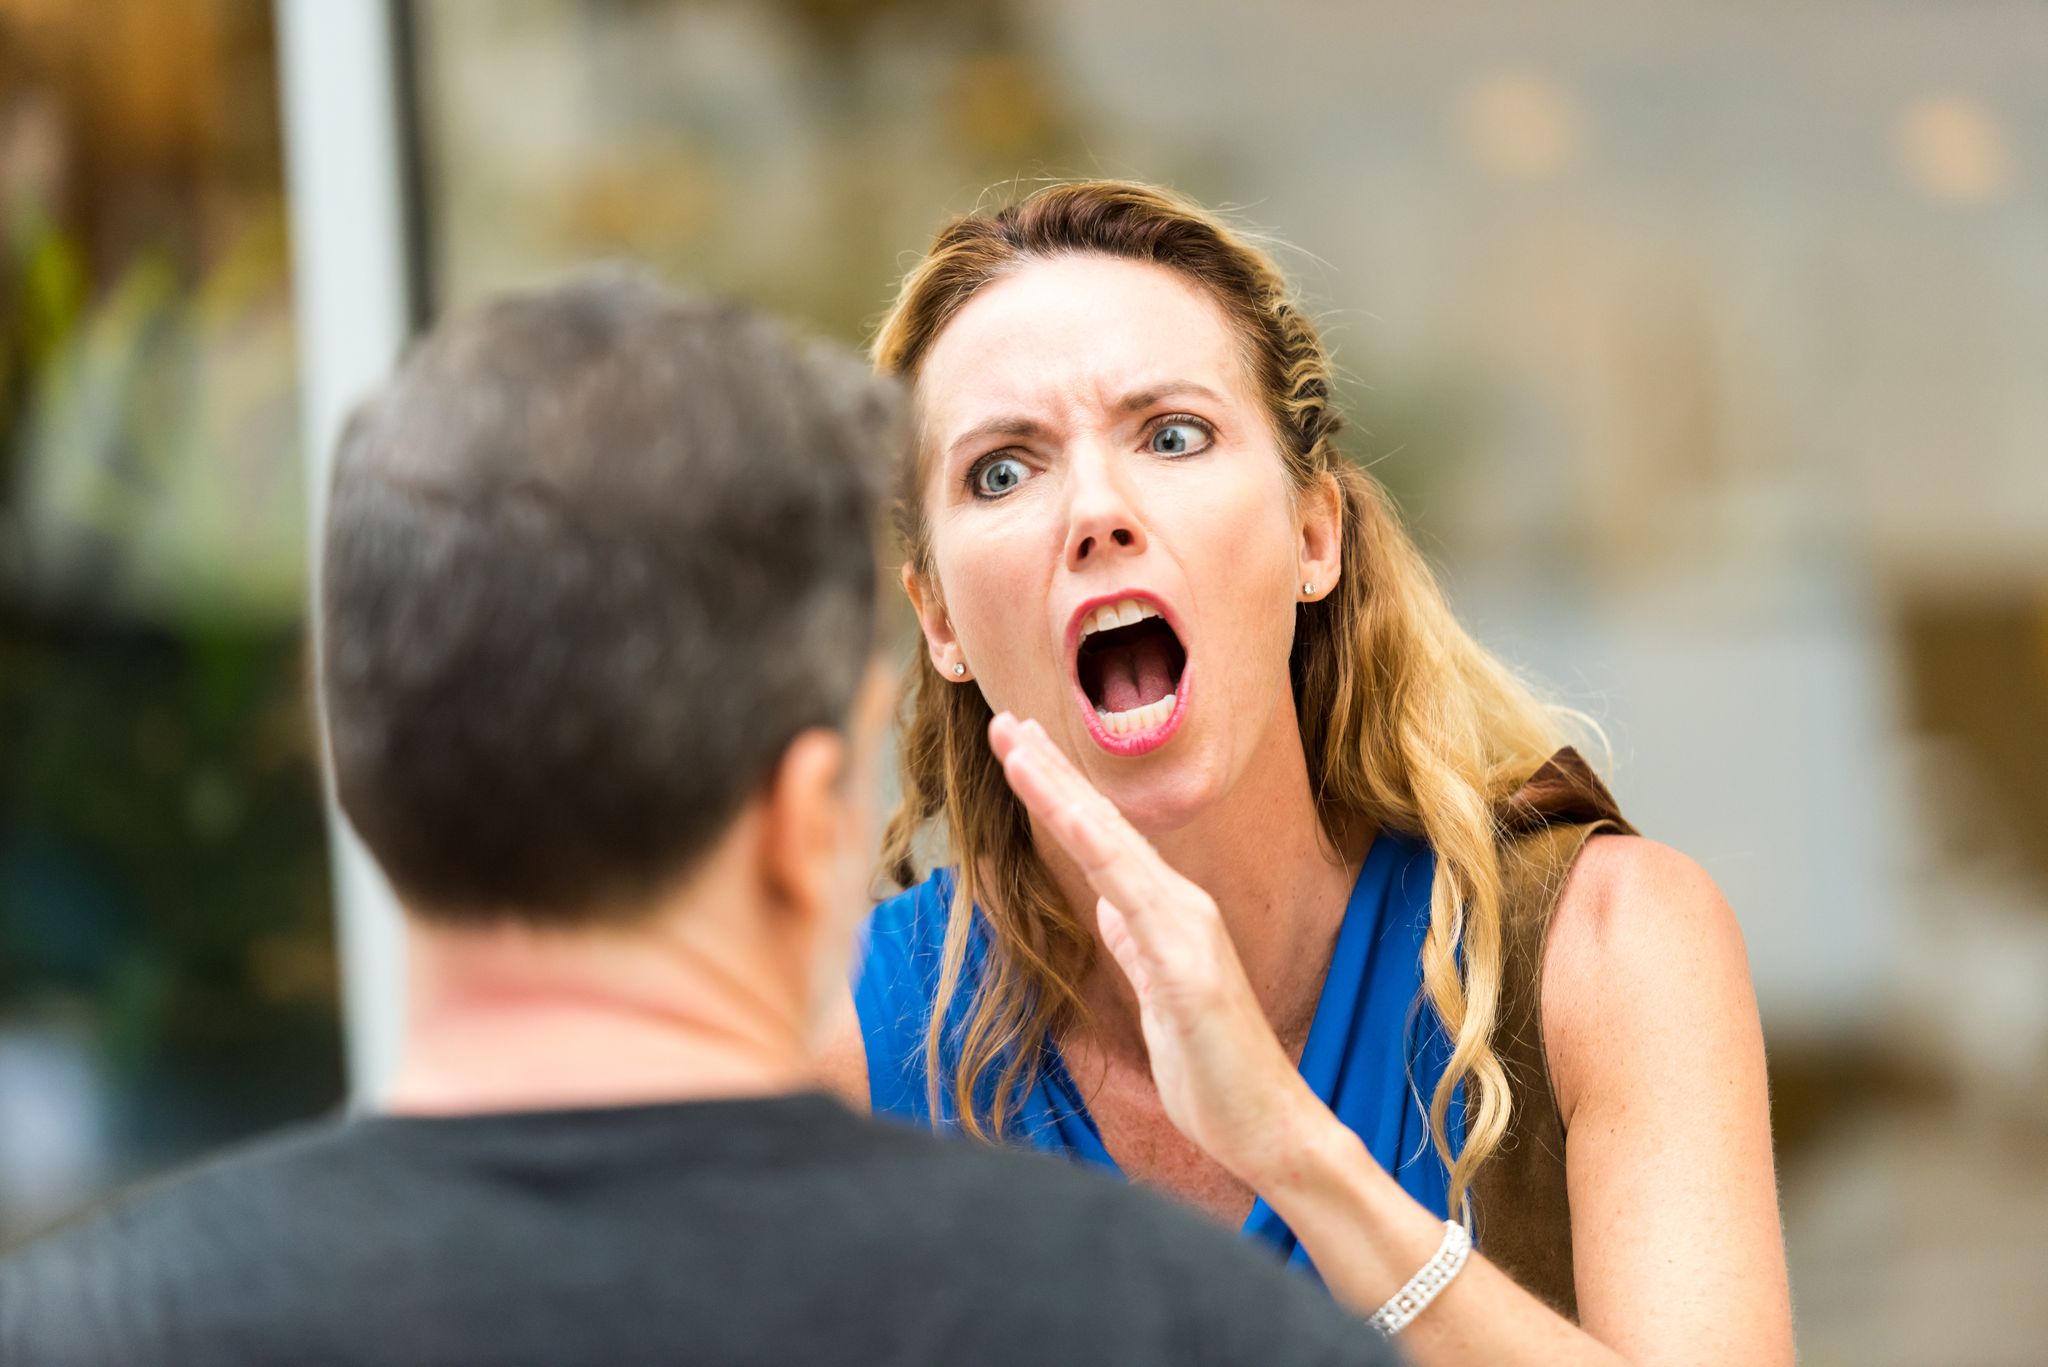 A woman shouting at a man. | Source: Getty Images